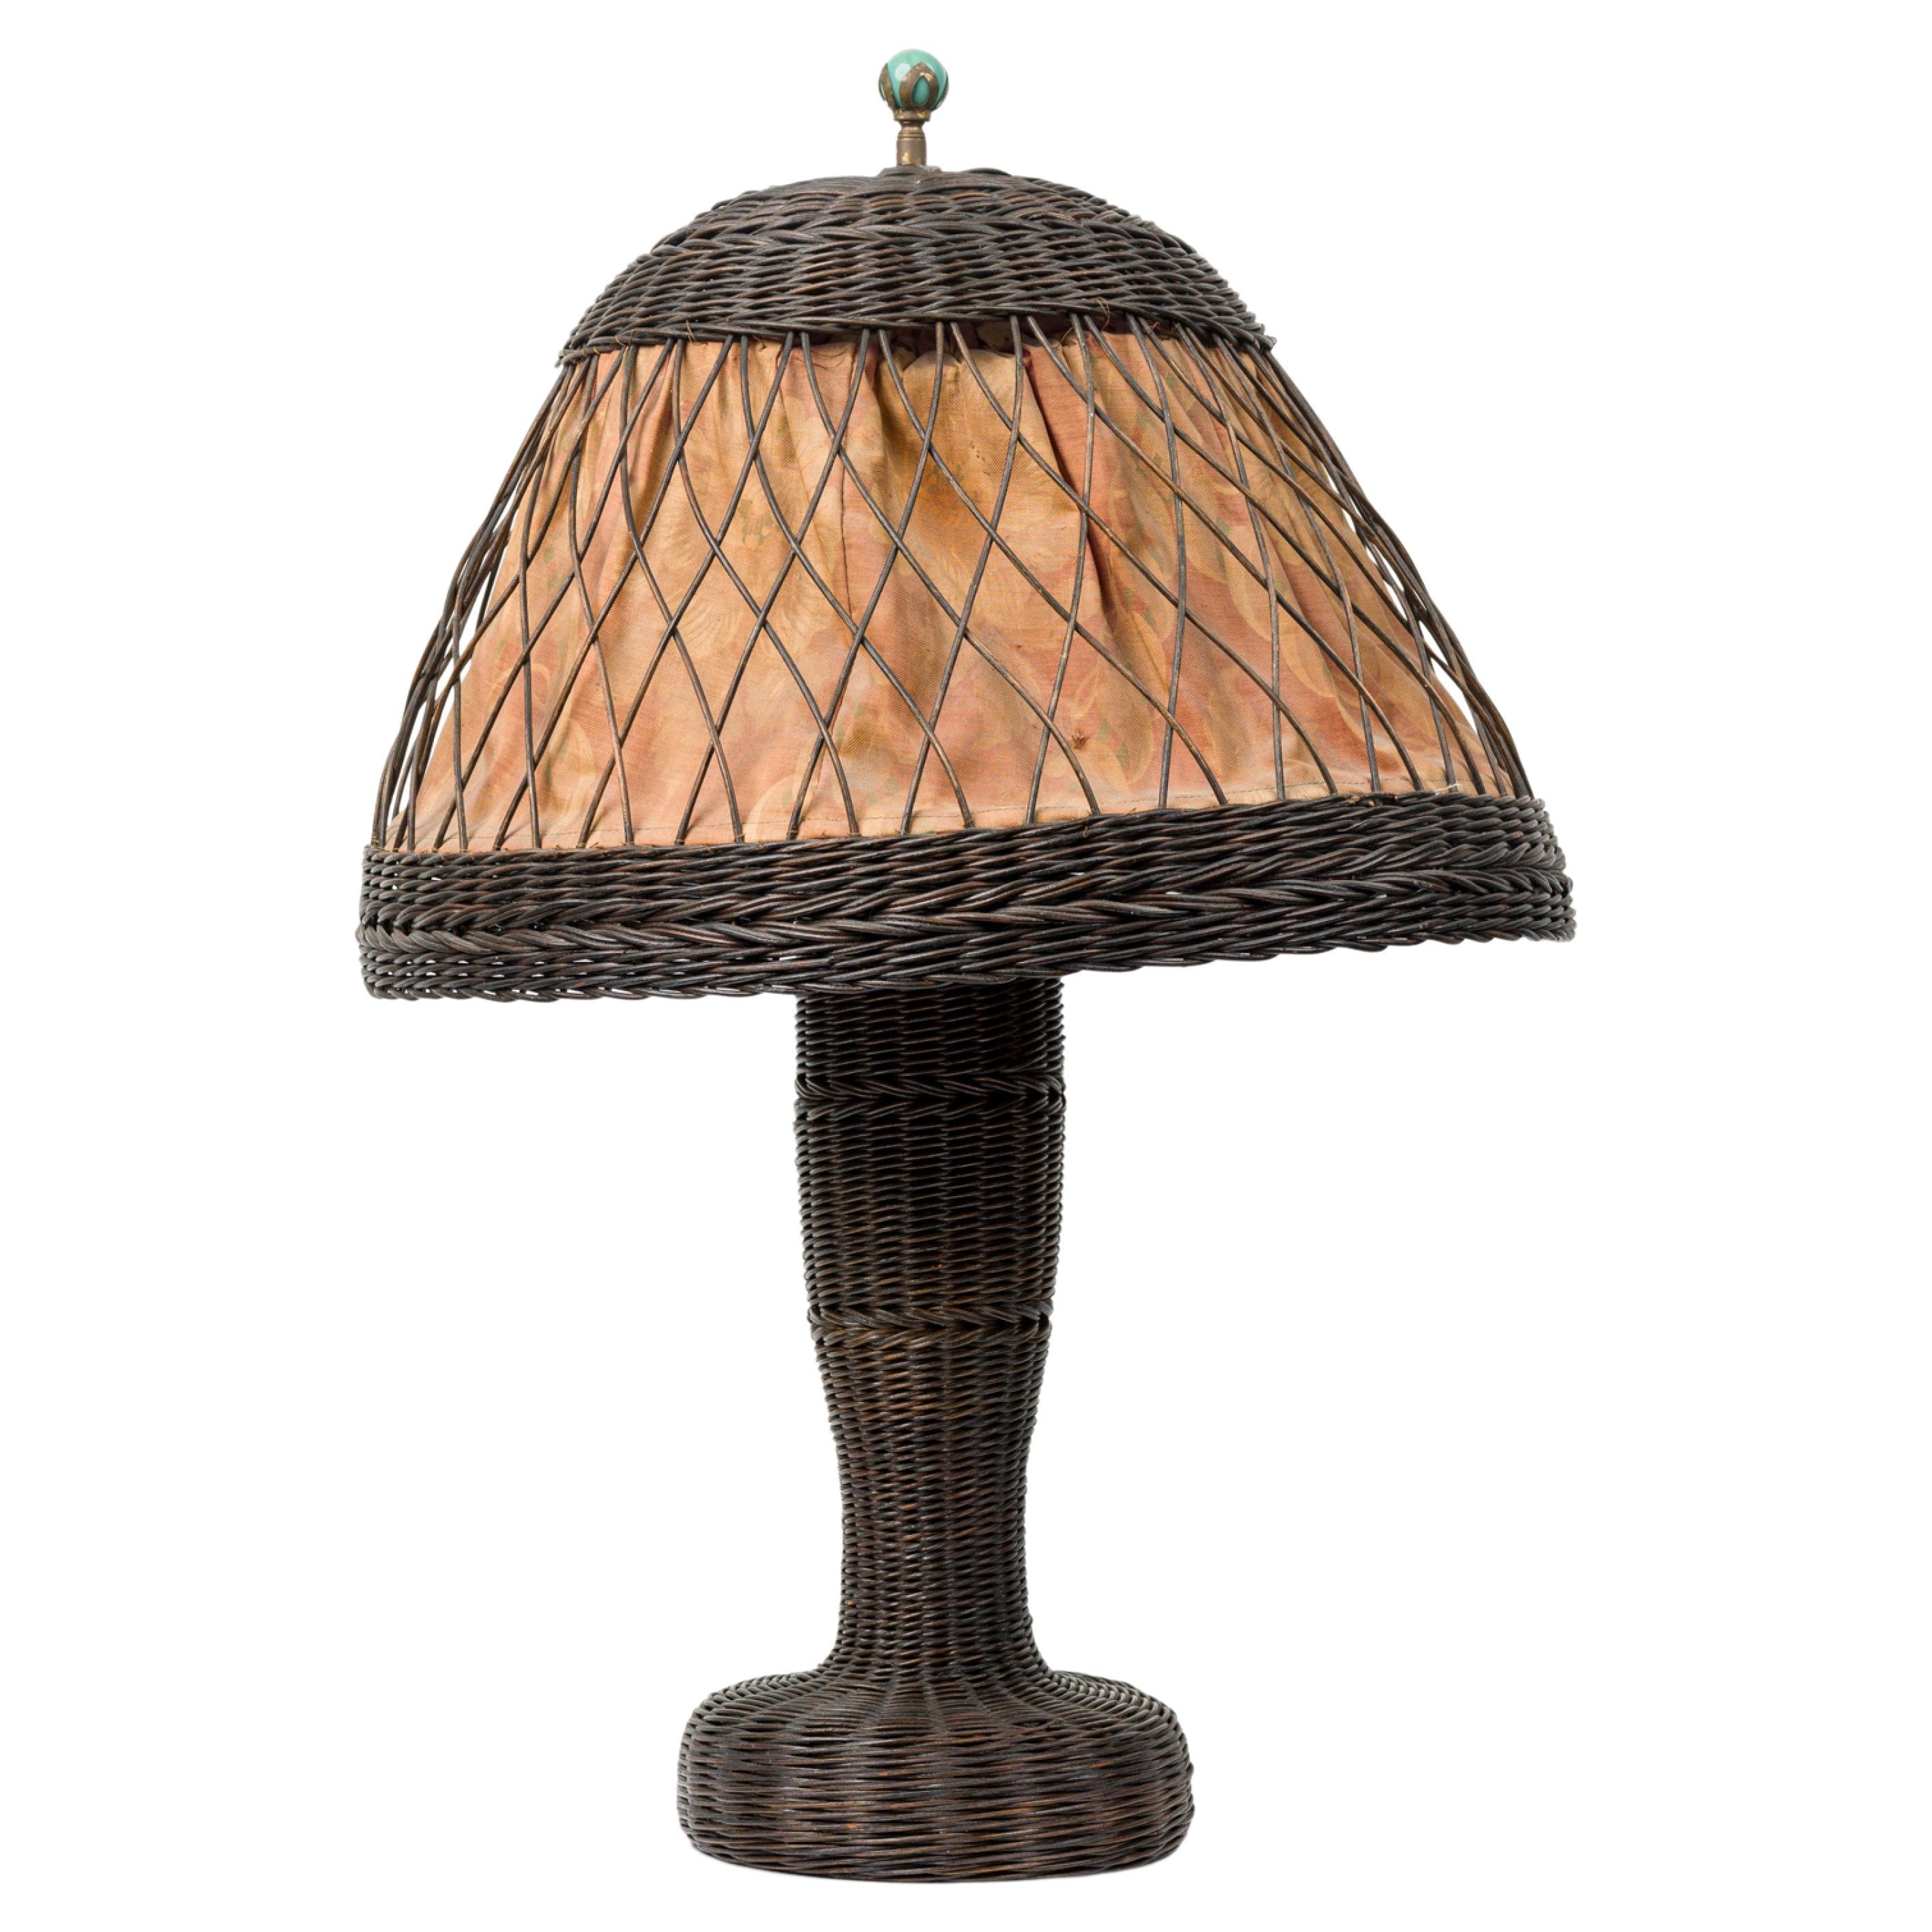 American Victorian Wicker and Brass Table Lamp with Conical Lattice Wicker